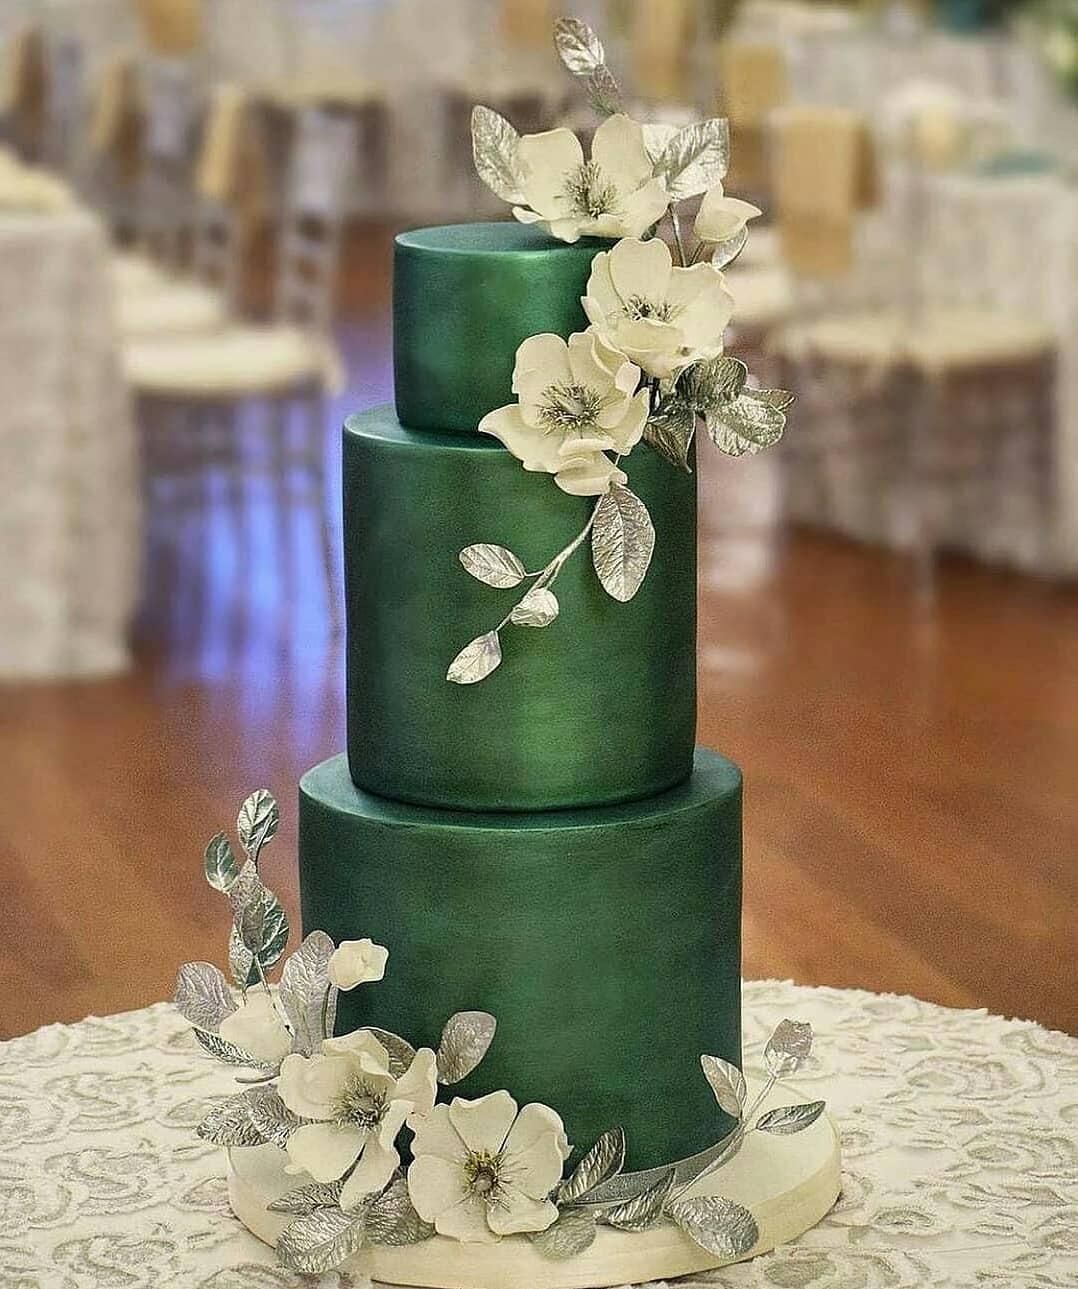 Green-themed green cake decor ideas for nature-inspired cakes